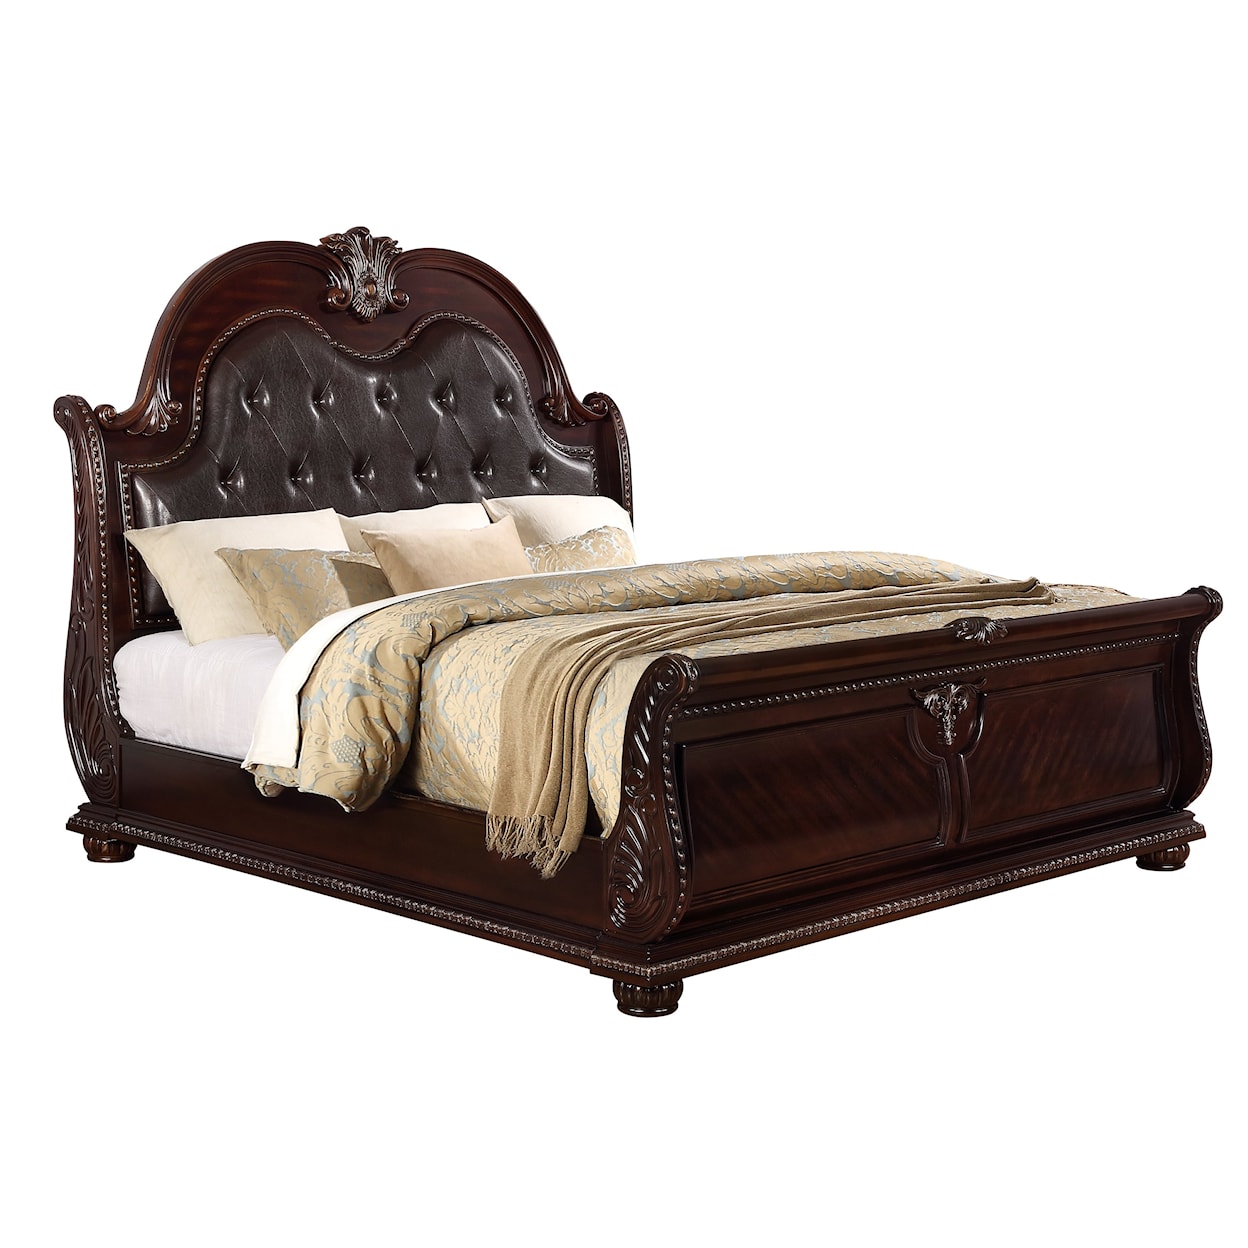 CM Stanley King Arched Panel Bed